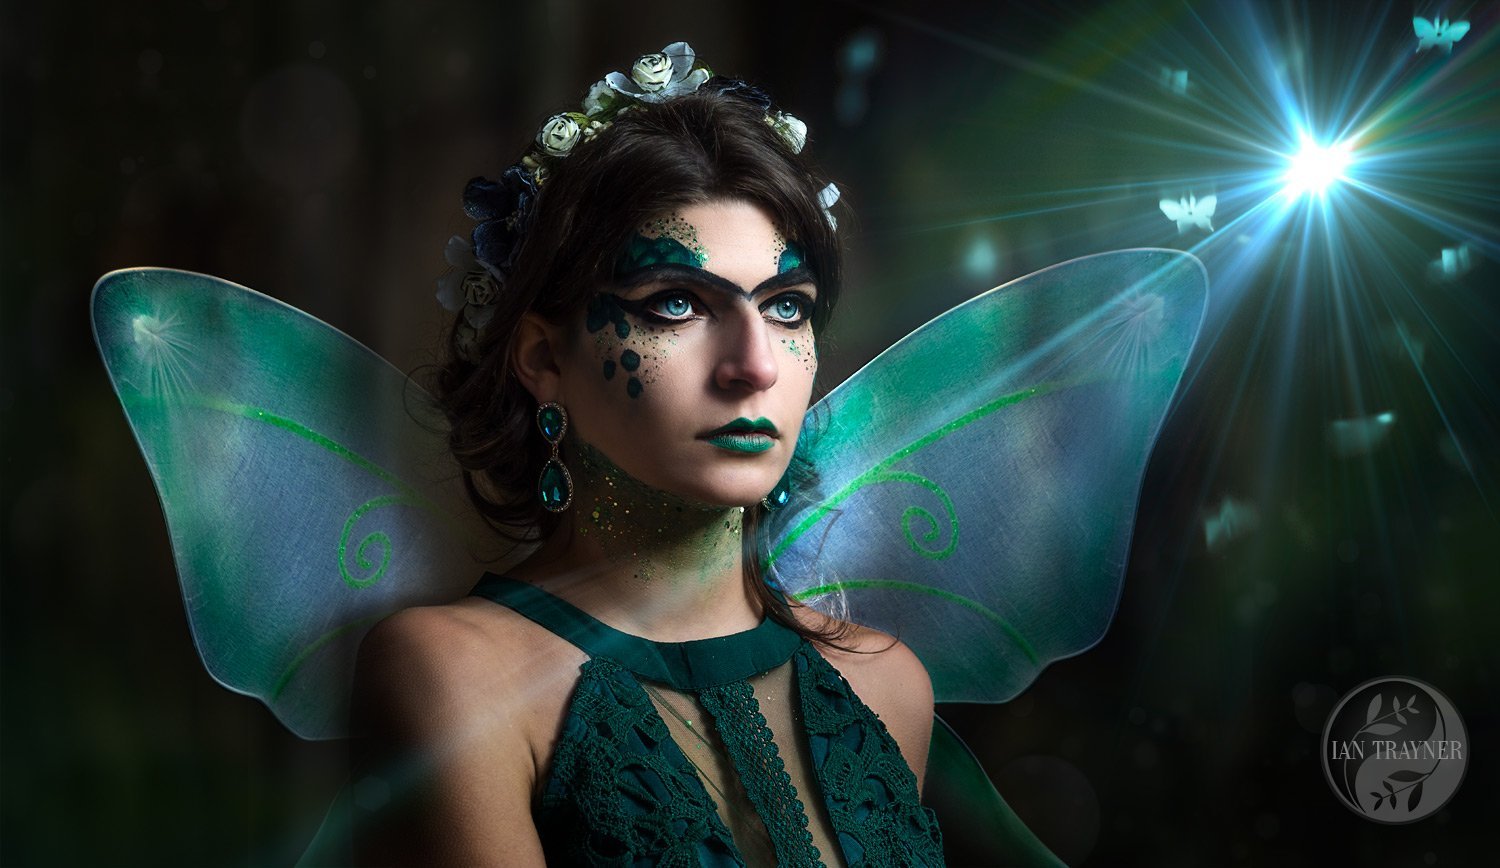 "Fairy Queen", composite photographic art by Ian Trayner